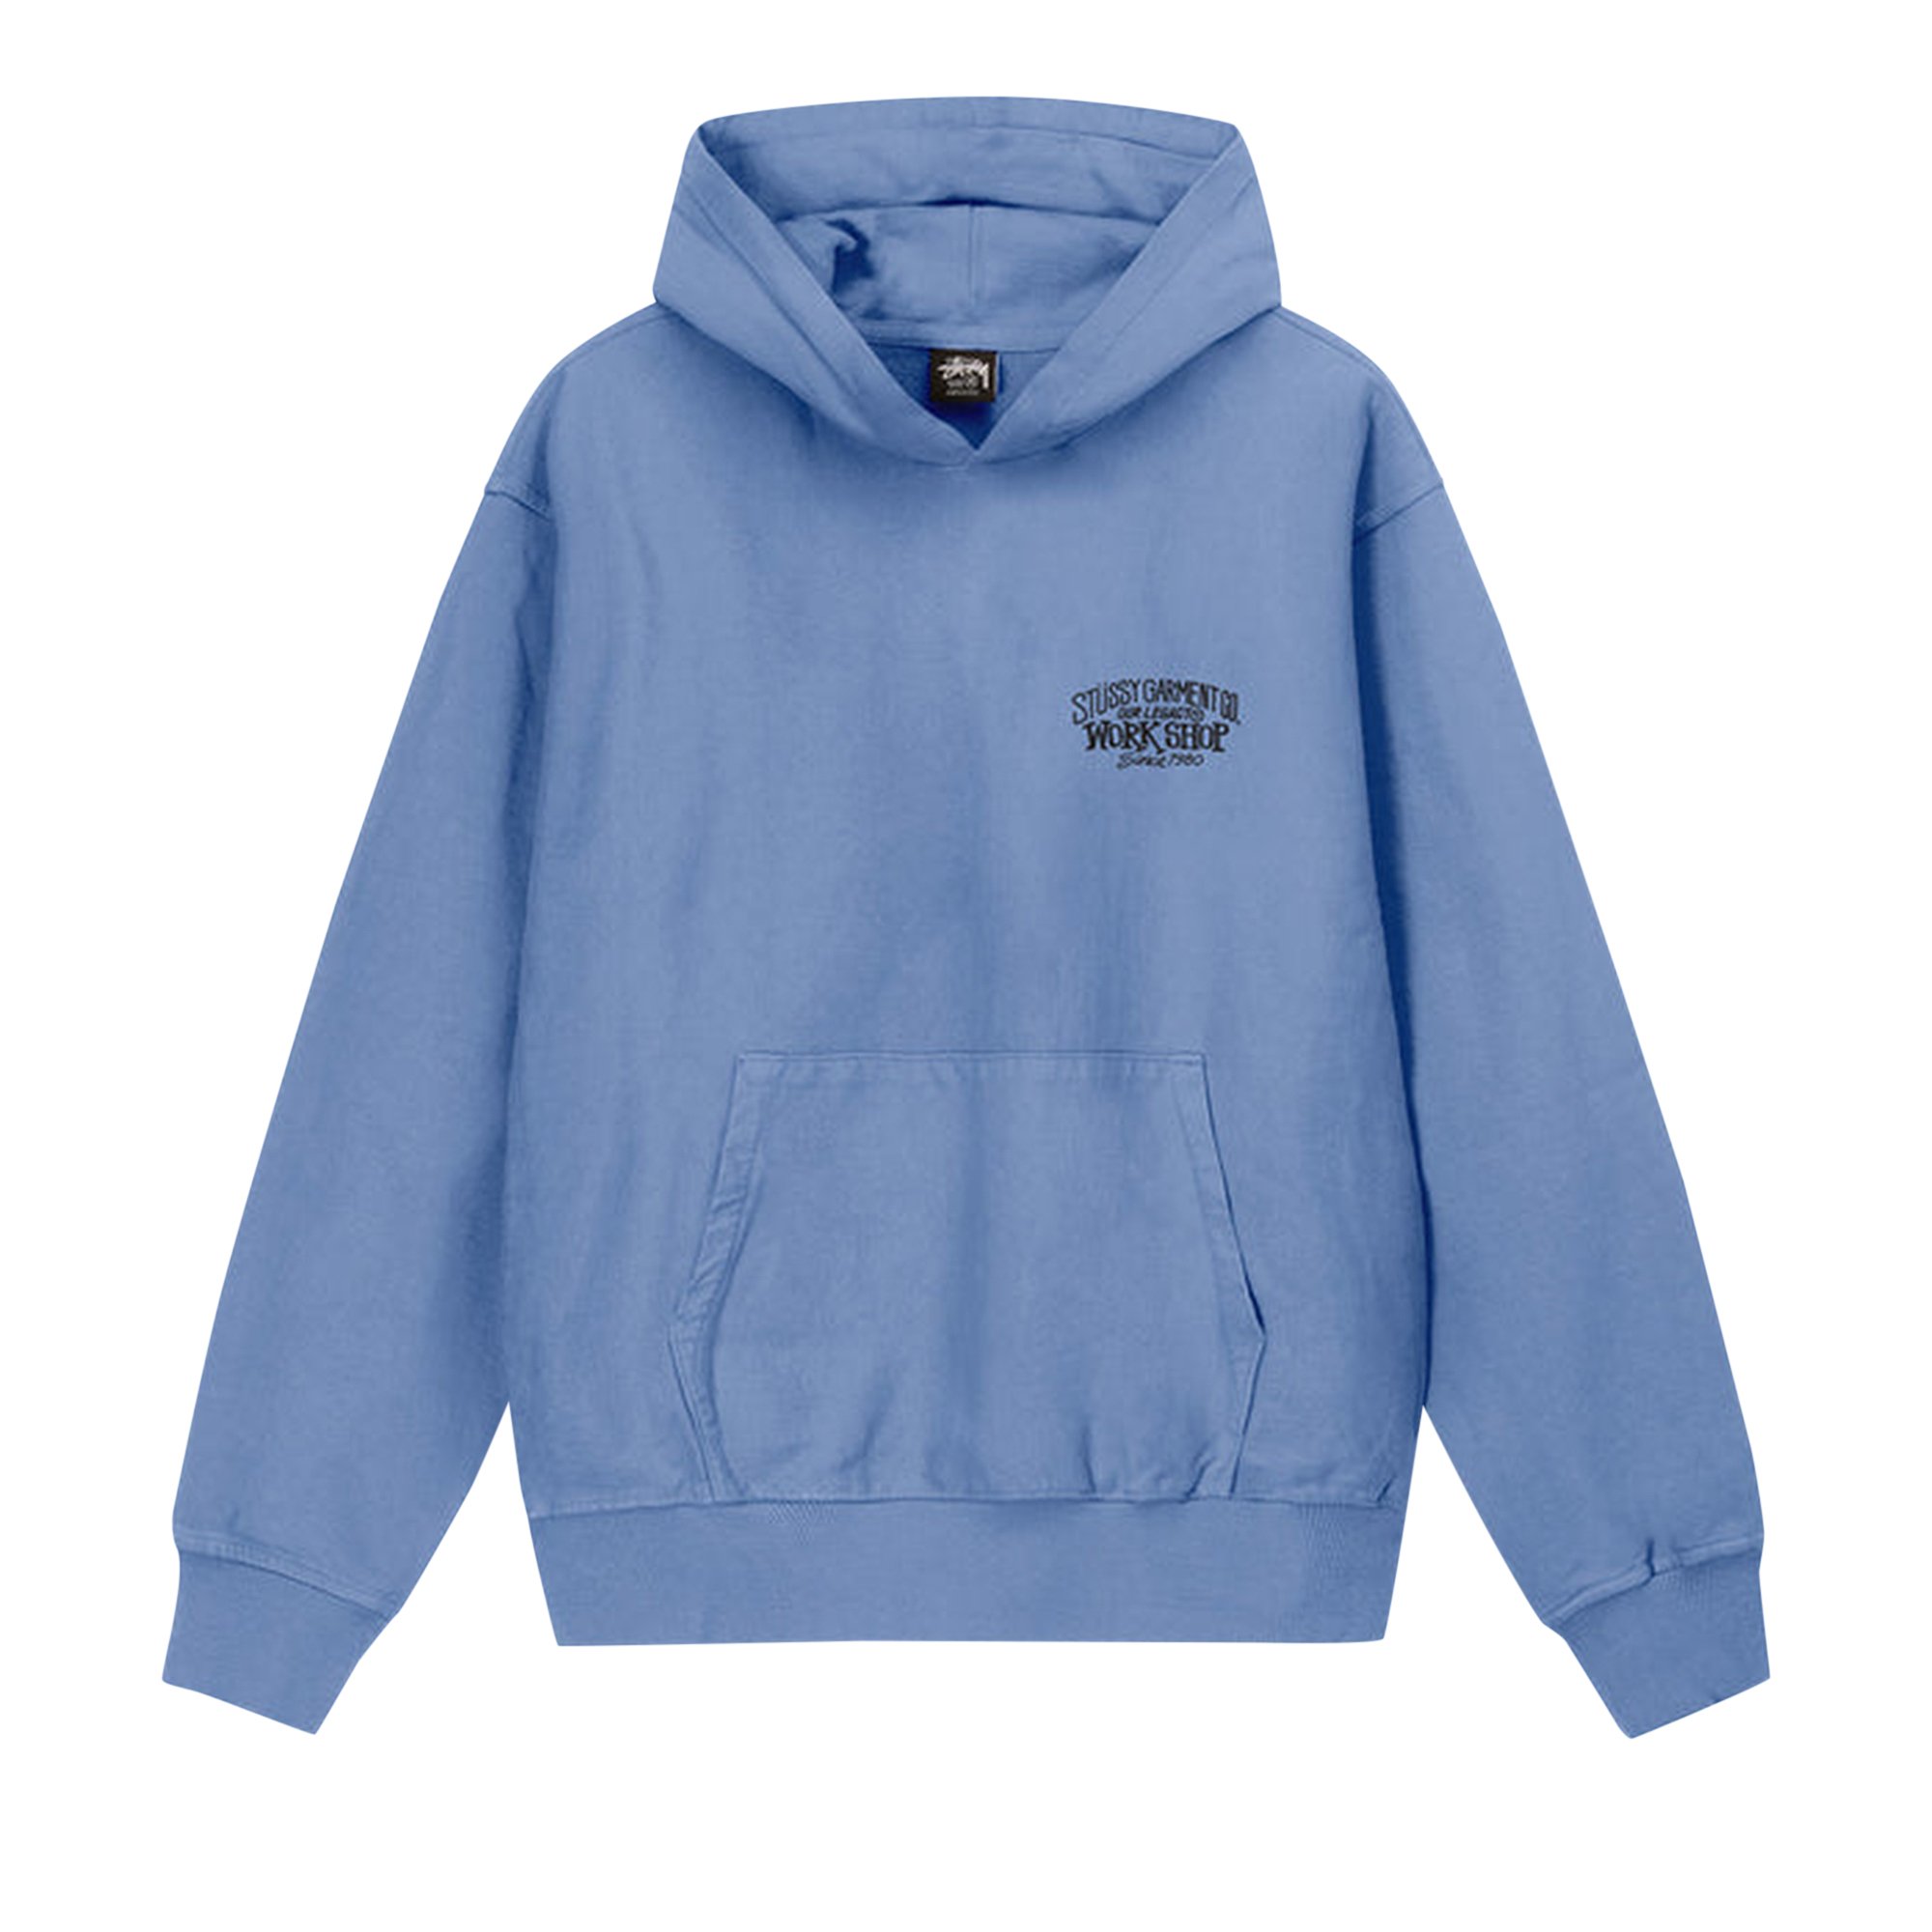 Stussy x Our Legacy Work Shop Surfman Pigment Dyed Hoodie 'Blue'